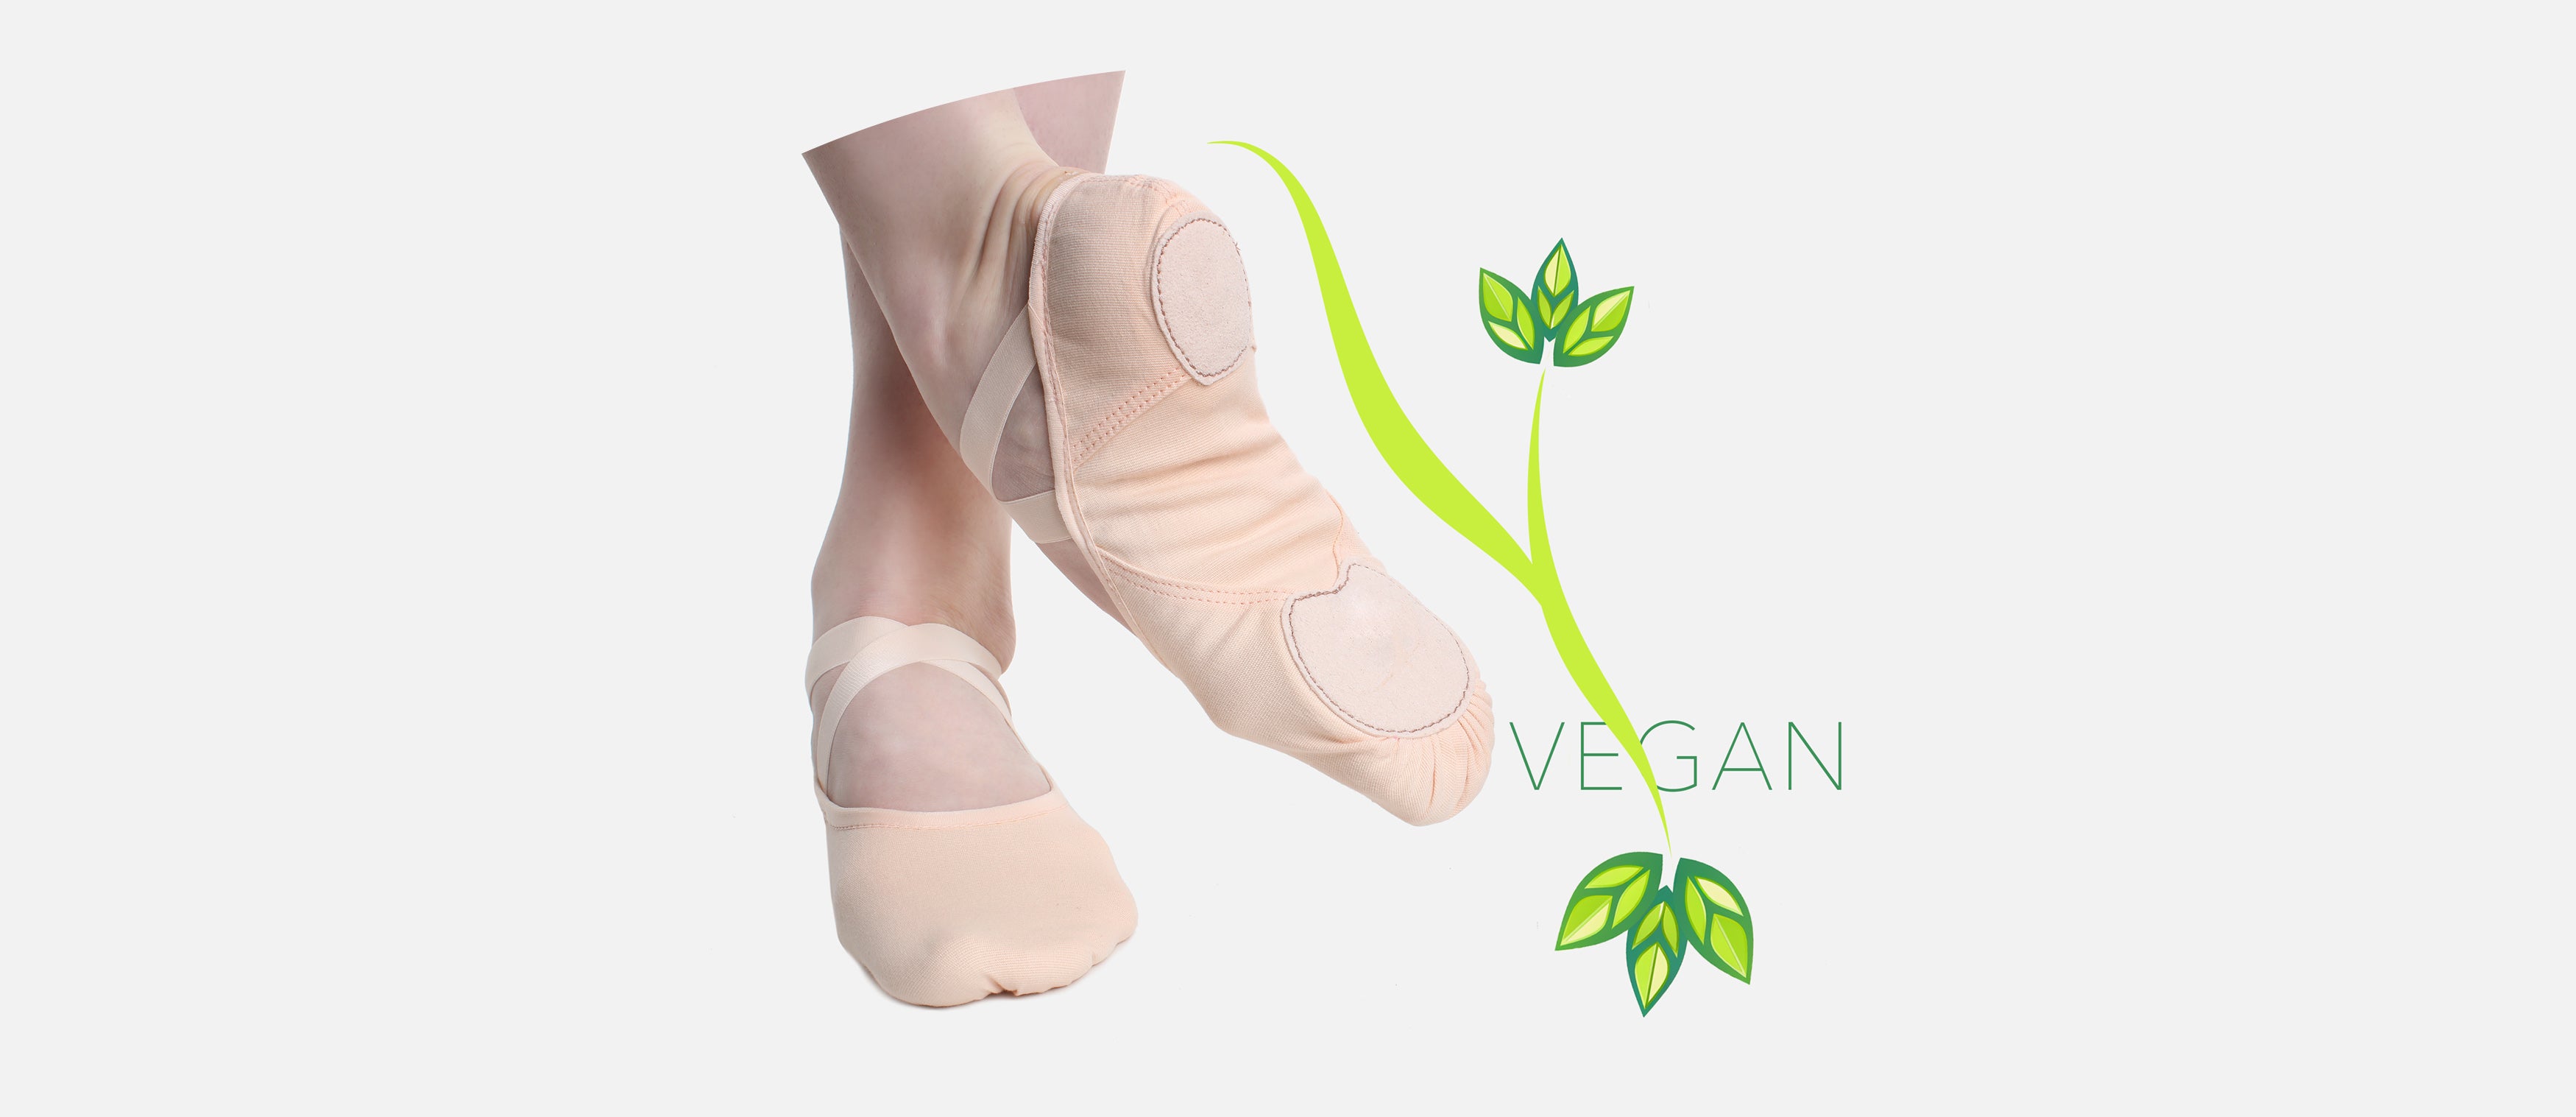 Dance with Heart, Glide with Sole: Vegan Ballet Shoes, The Happy Feet's Goal!" 🌱🩰💃